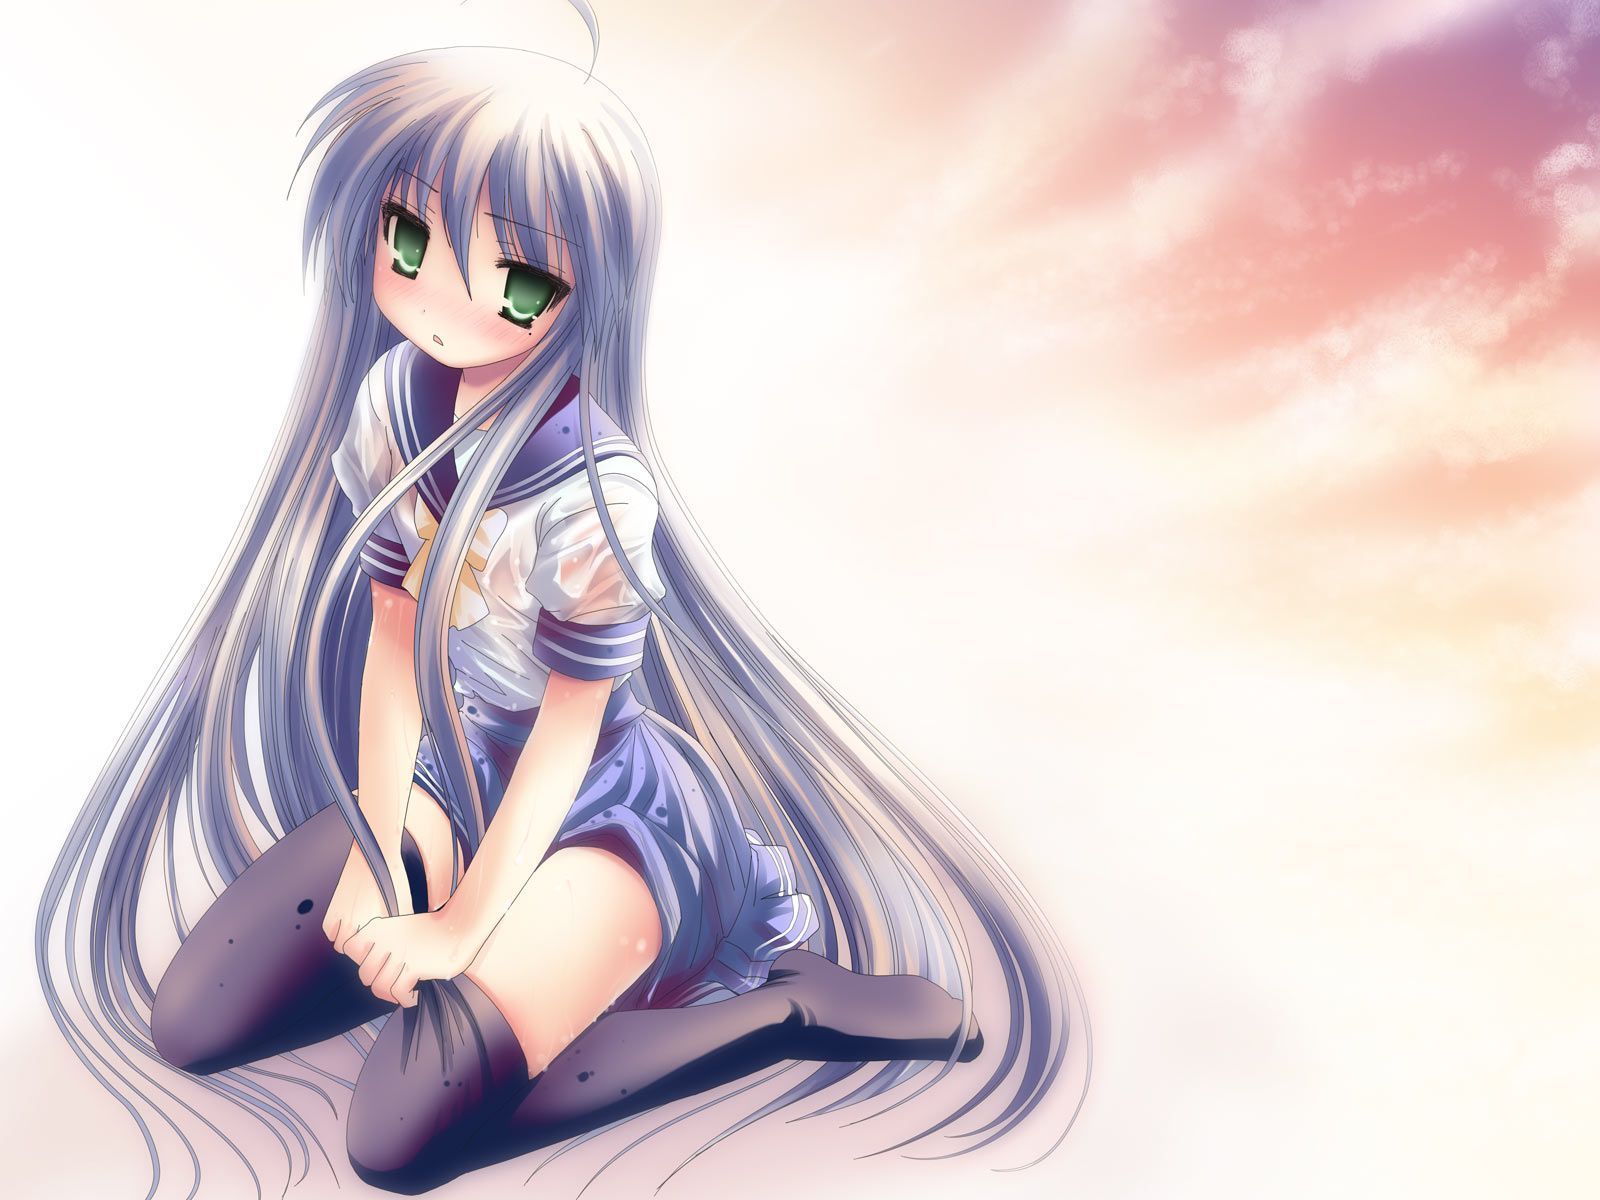 Cute Anime Girl Wallpaper For Android Apk Download Anime